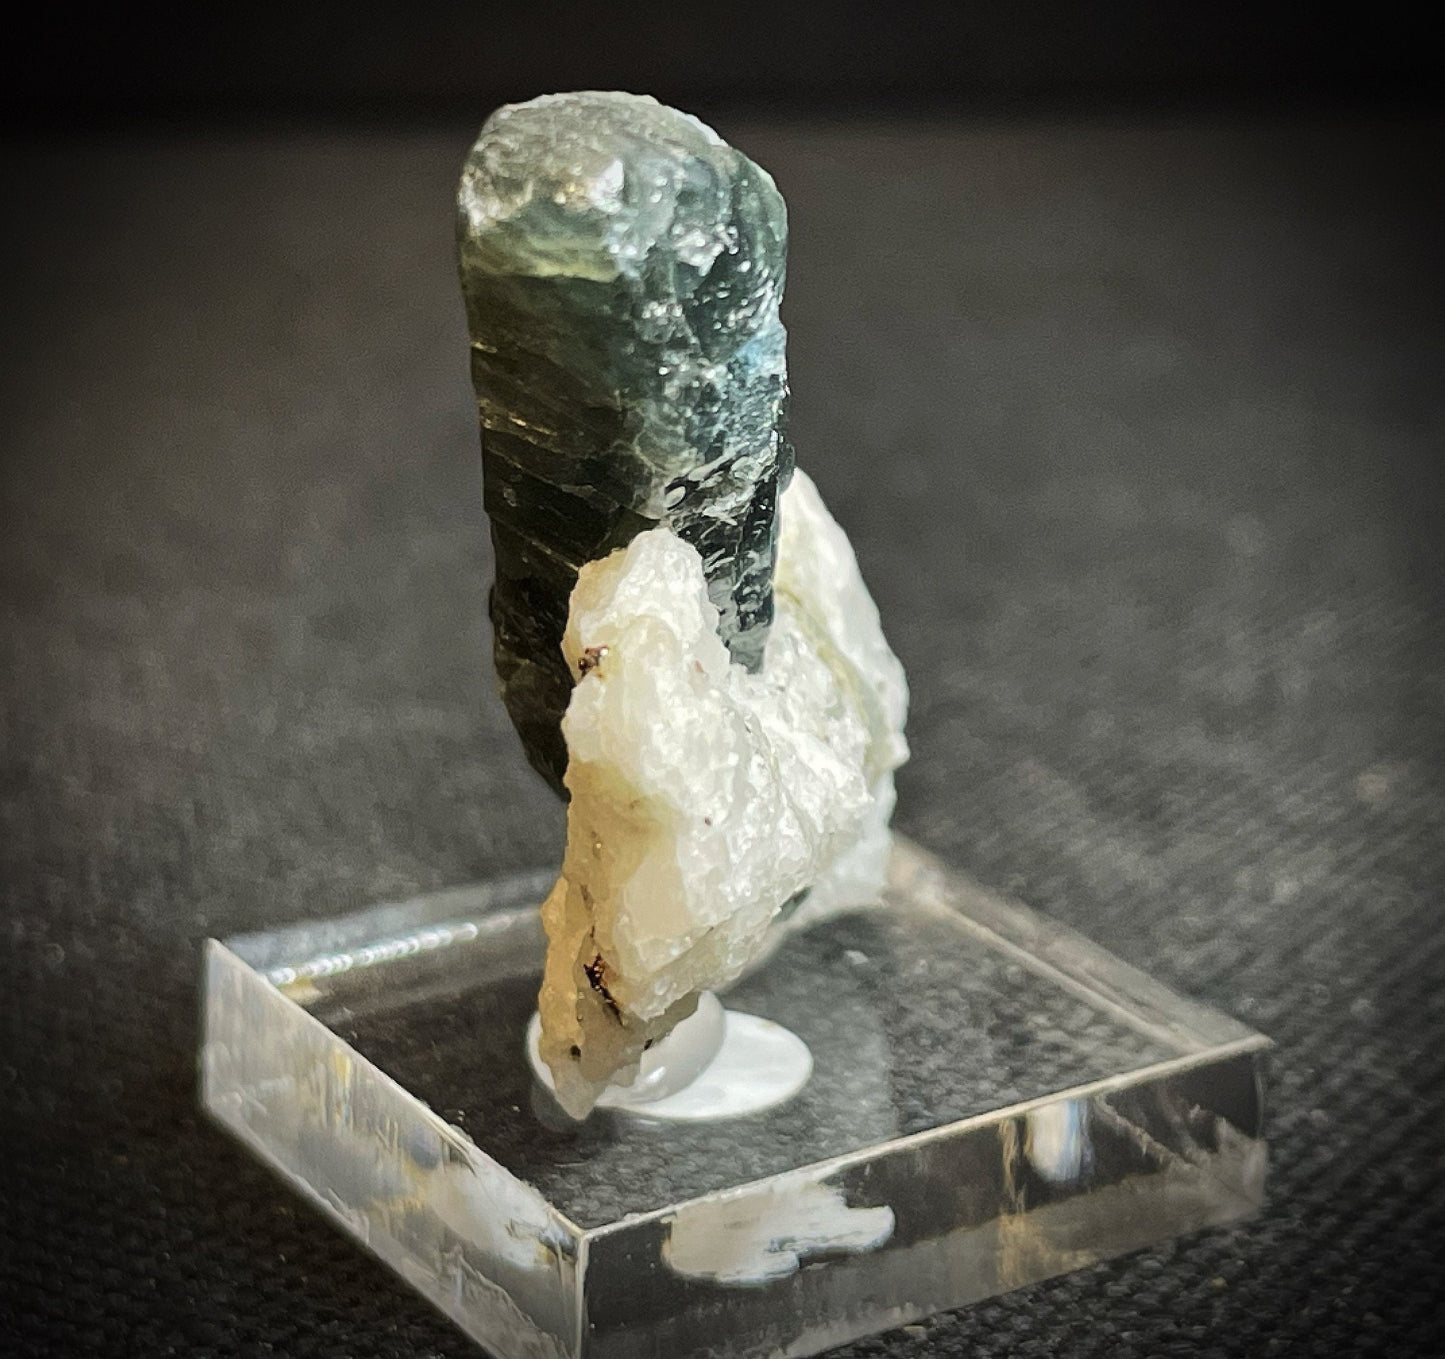 Apatite From Canoe Lake, Ontario, Canada- Collectors piece, crystal, gift